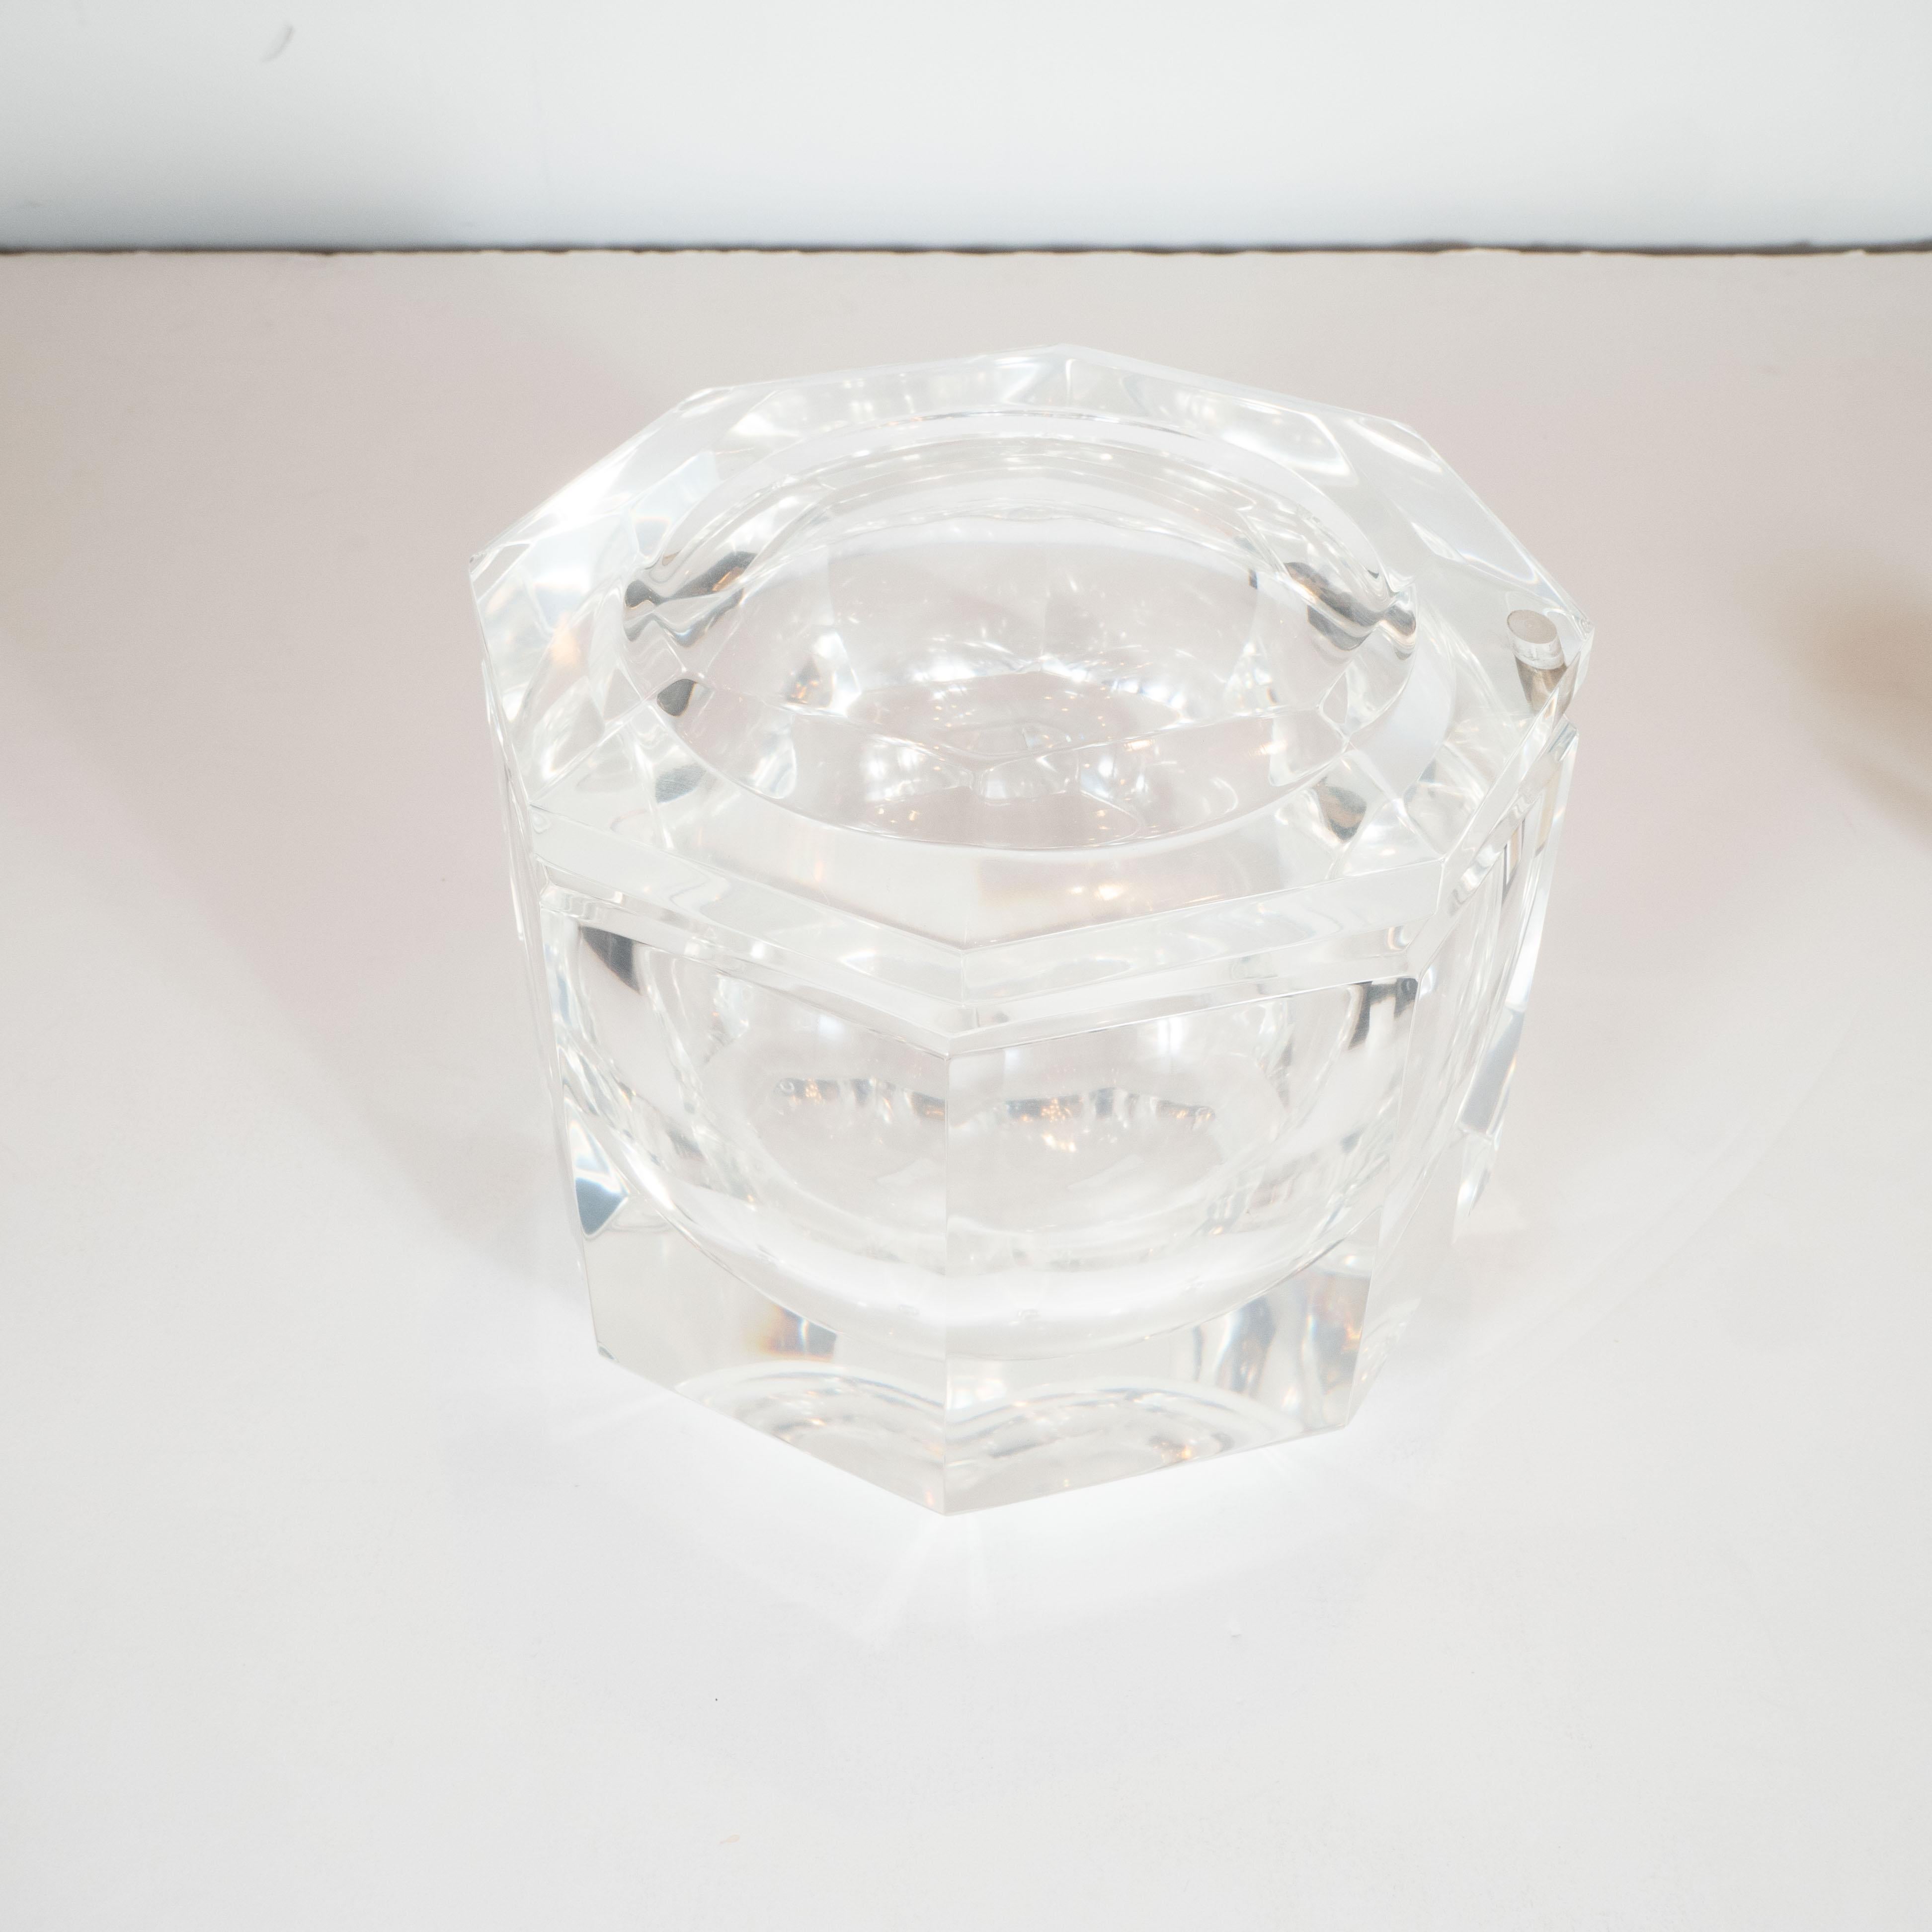 This elegant Mid-Century Modern octagonal ice bucket was realized in the United States by the esteemed designer Carol Stupell, circa 1970. It features a faceted body and top composed of faceted translucent Lucite, giving it the overall appearance of